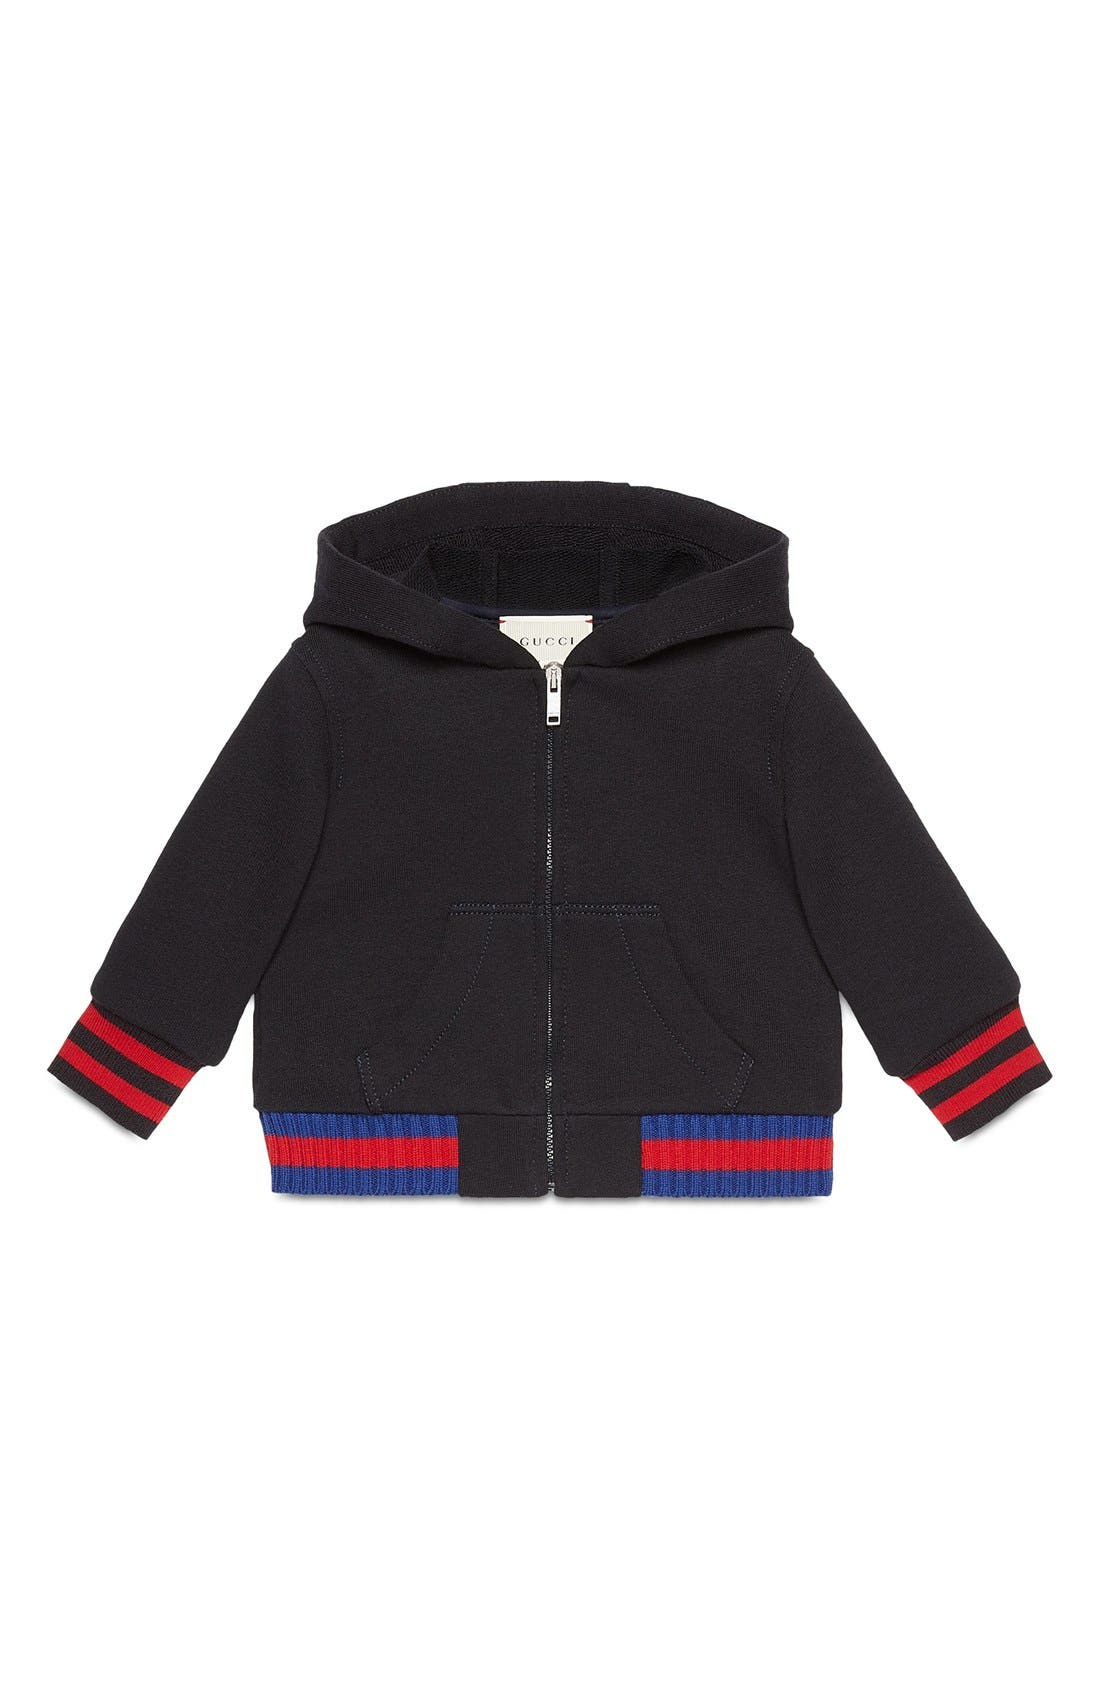 baby gucci hoodie